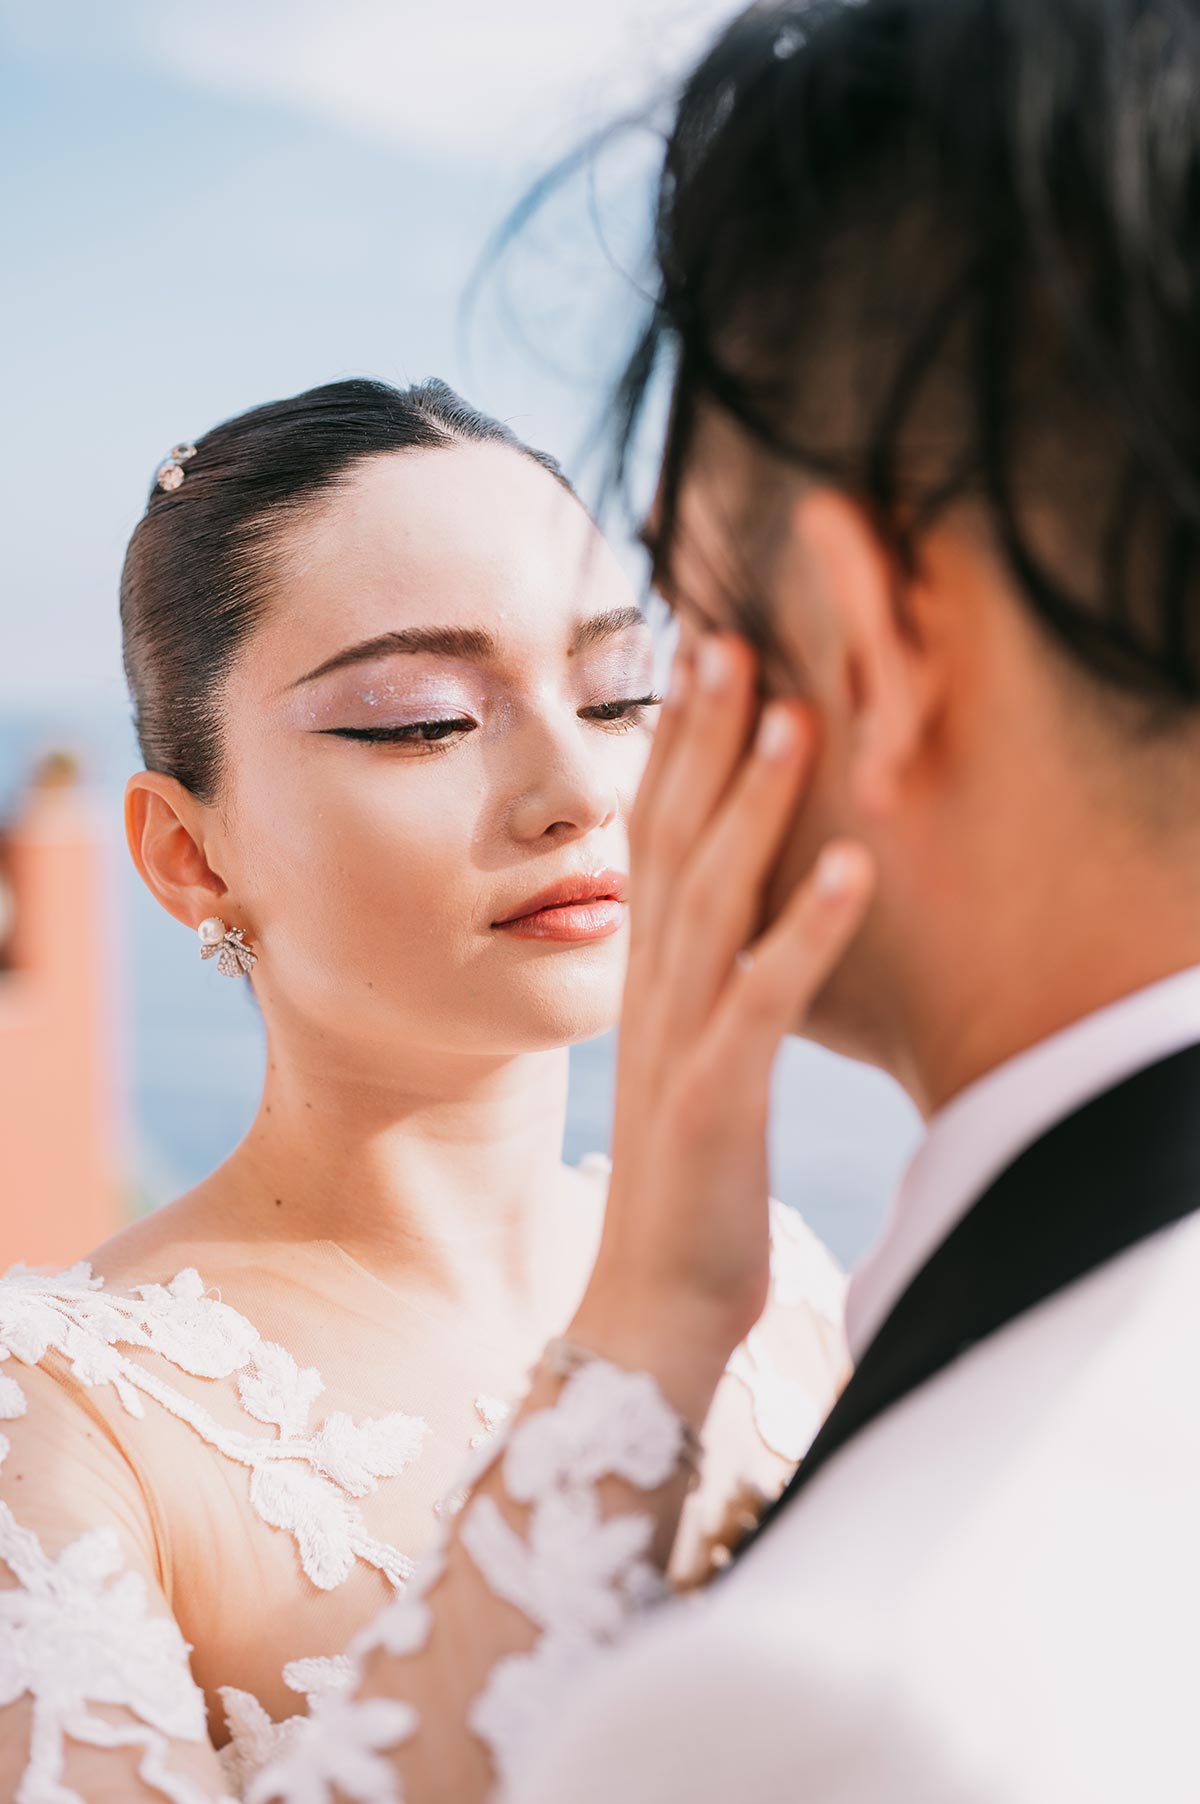 Top wedding photographers | Emiliano Russo | Villa dei Fisici wedding 5 3 | Top Wedding Photographers never let you down: they are not afraid to work under pressure and to deal with different and extreme lighting conditions